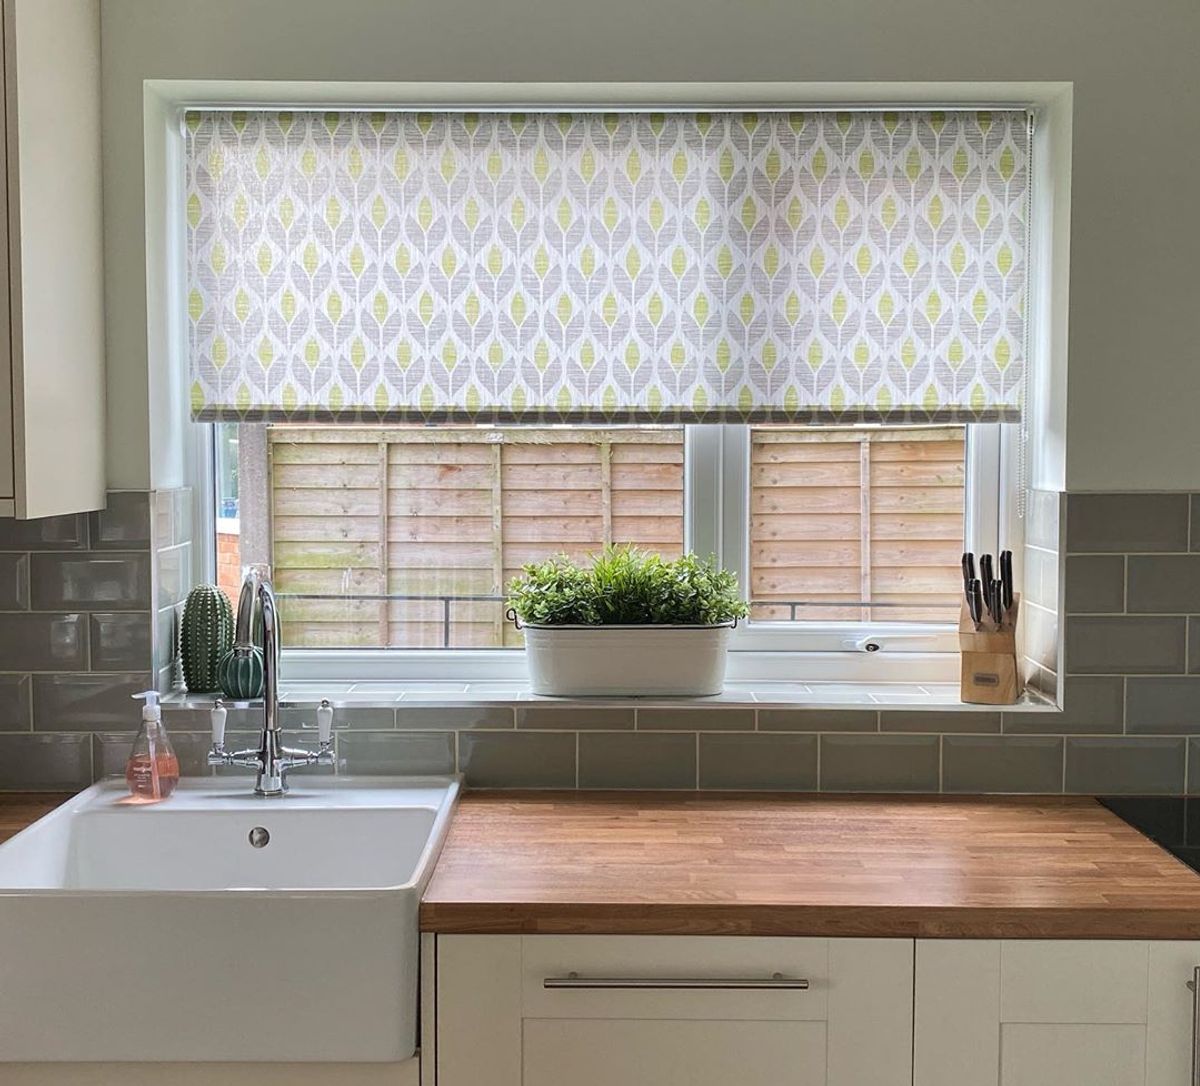 Petula Ochre Roller blind in kitchen behind wooden counter and white sink with green tiles and ceramic cacti